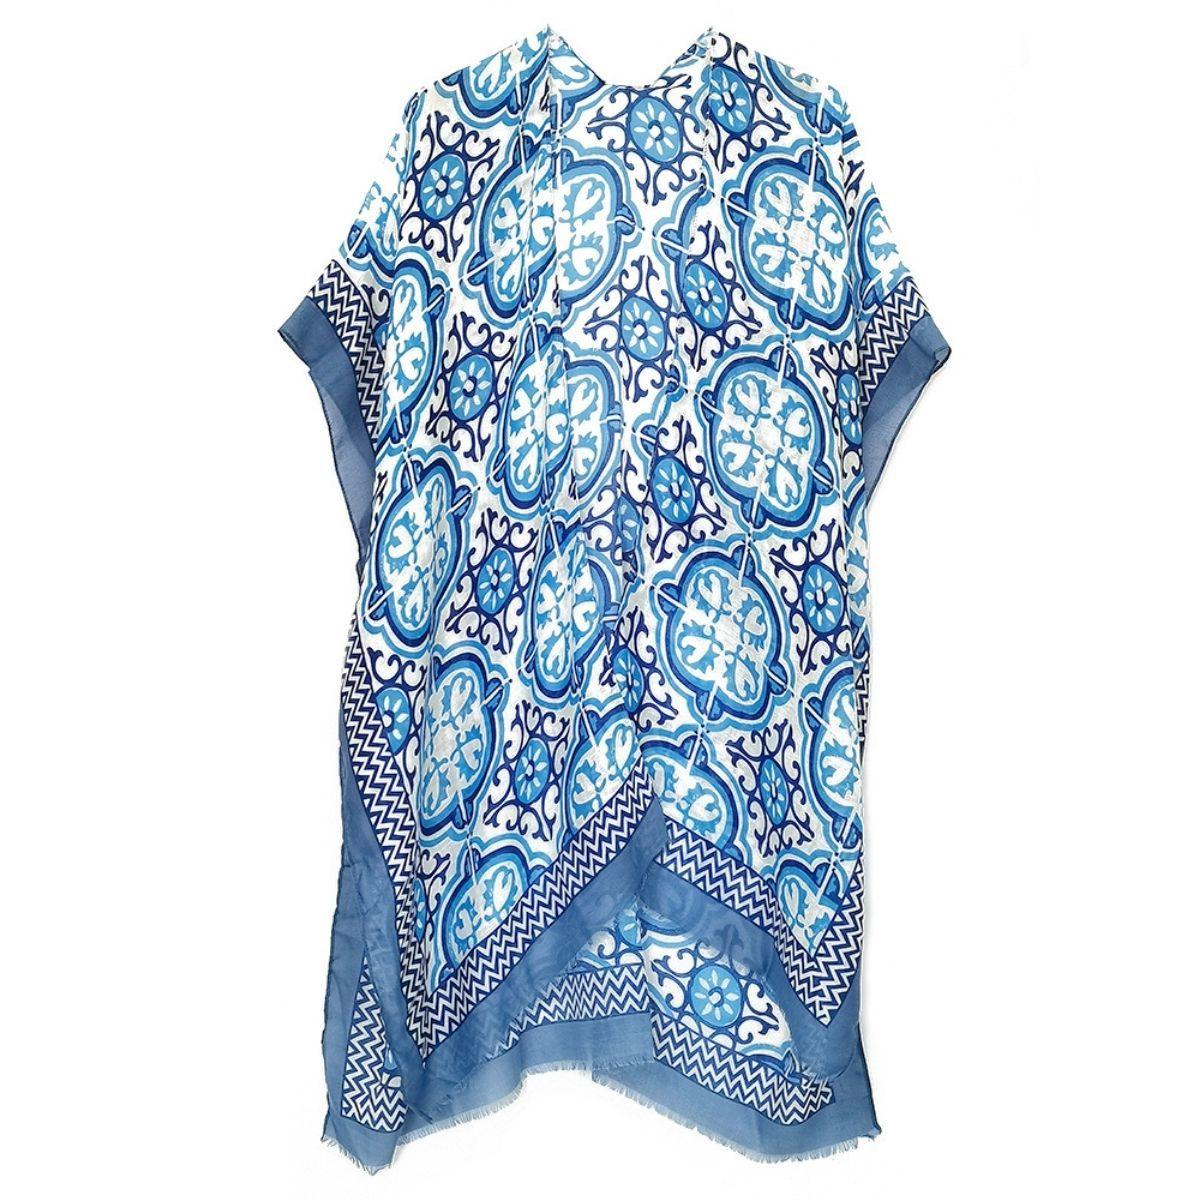 Get Ready for the Beach with this Stylish Blue Tile Print Kimono Cover